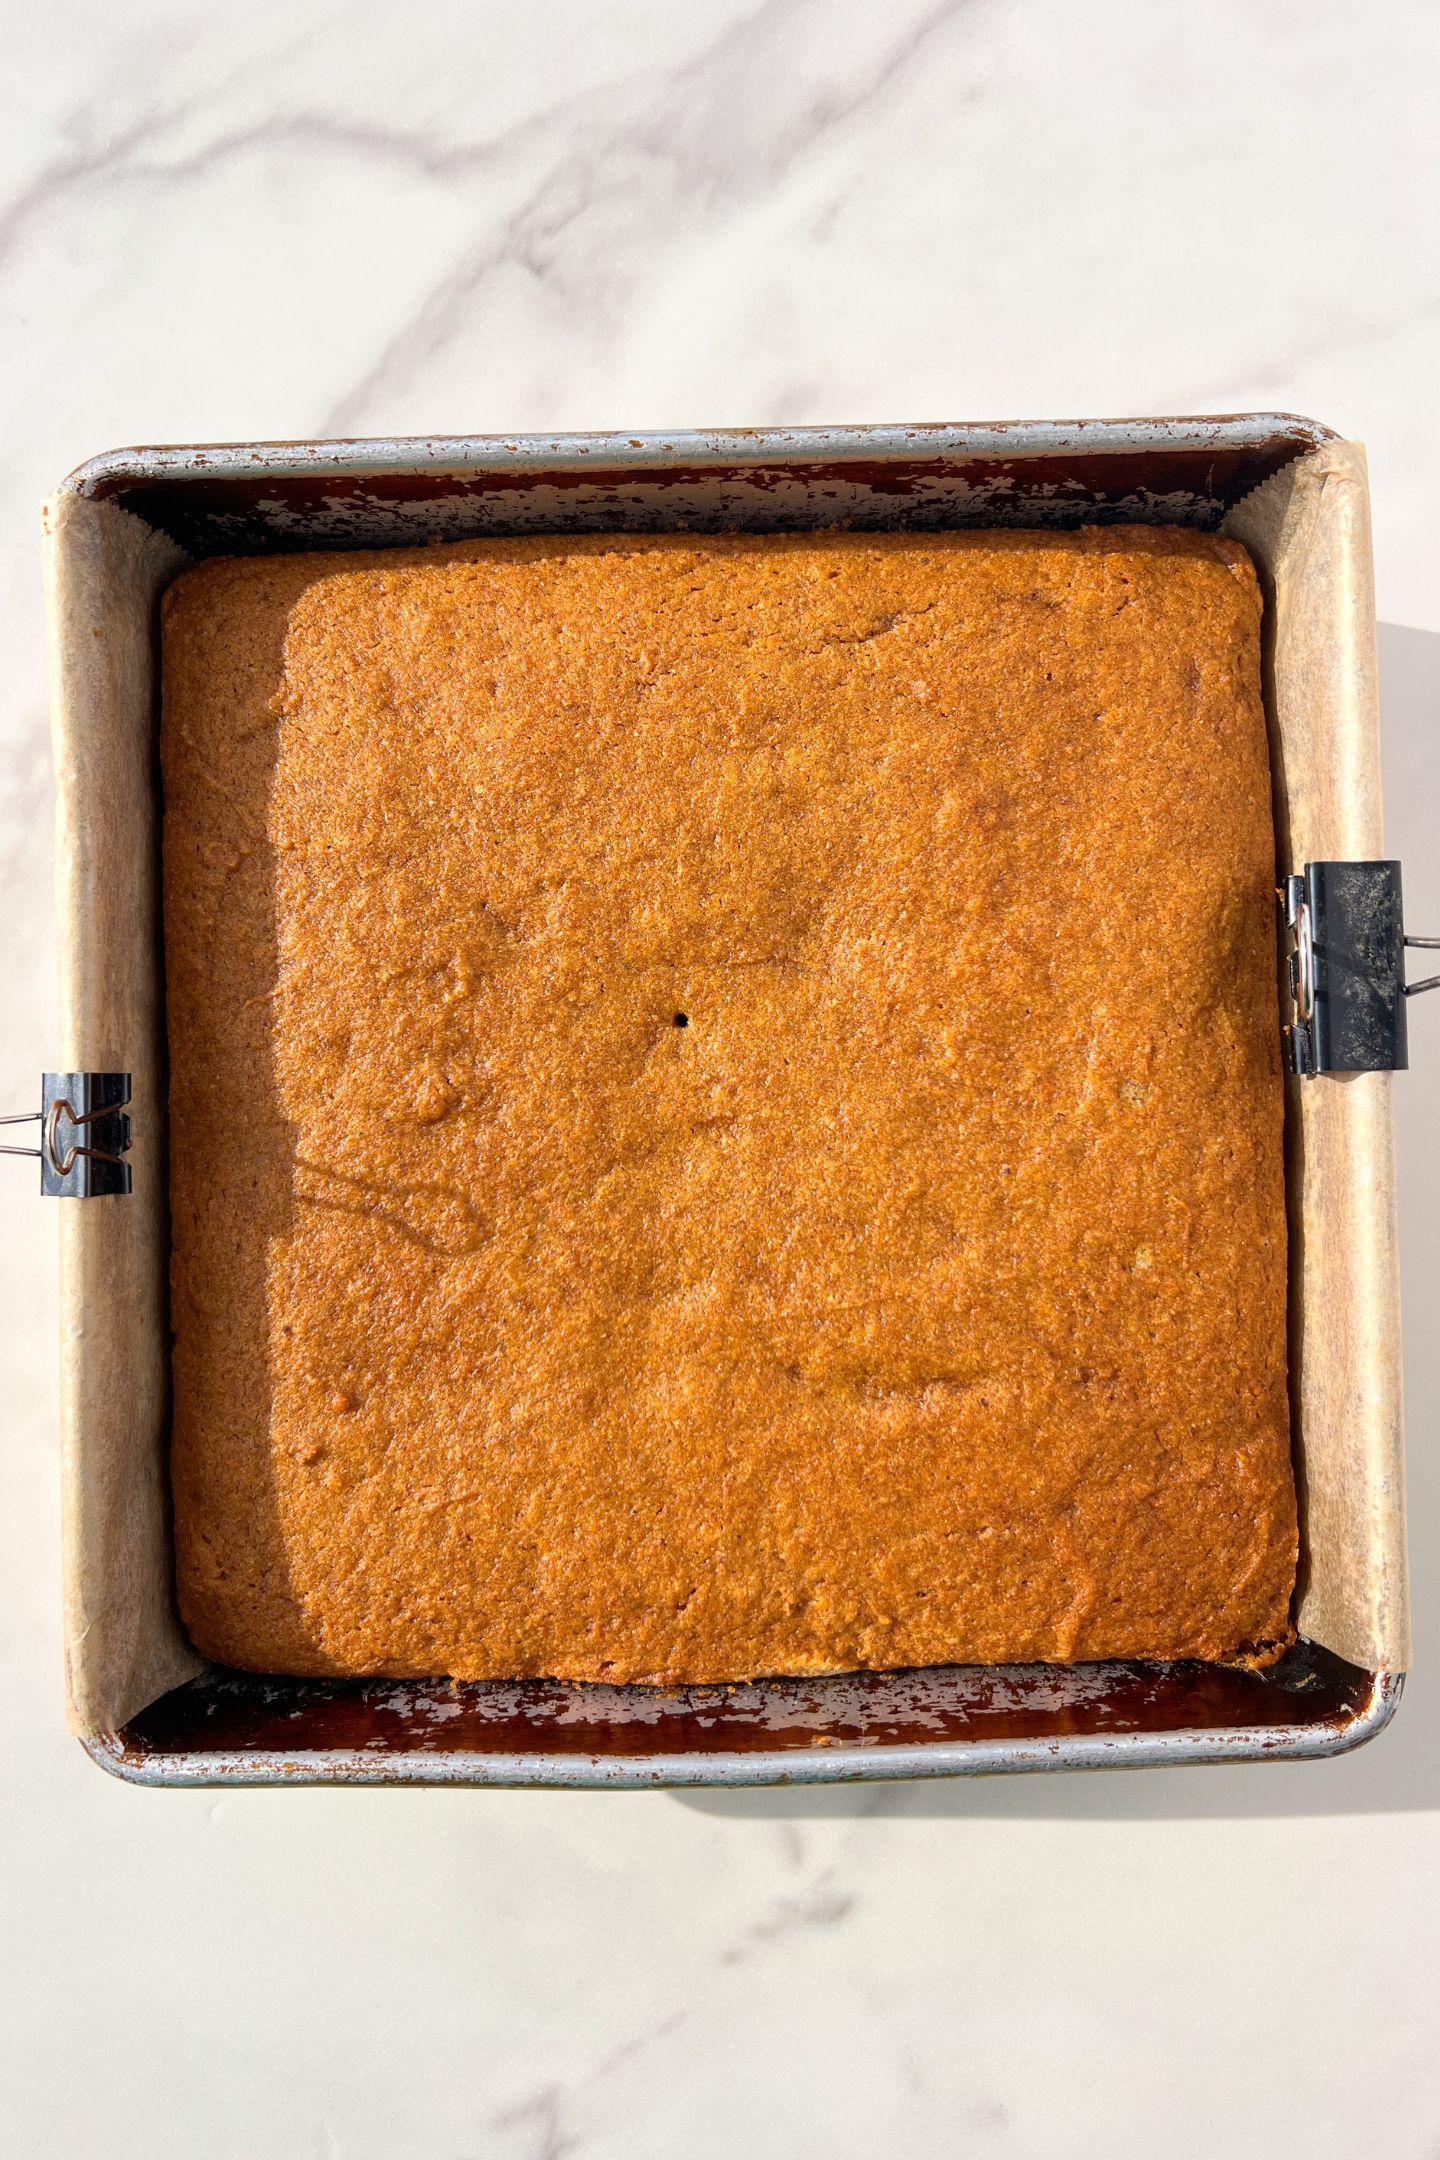 Baked pumpkin snack cake freshly out of the oven.